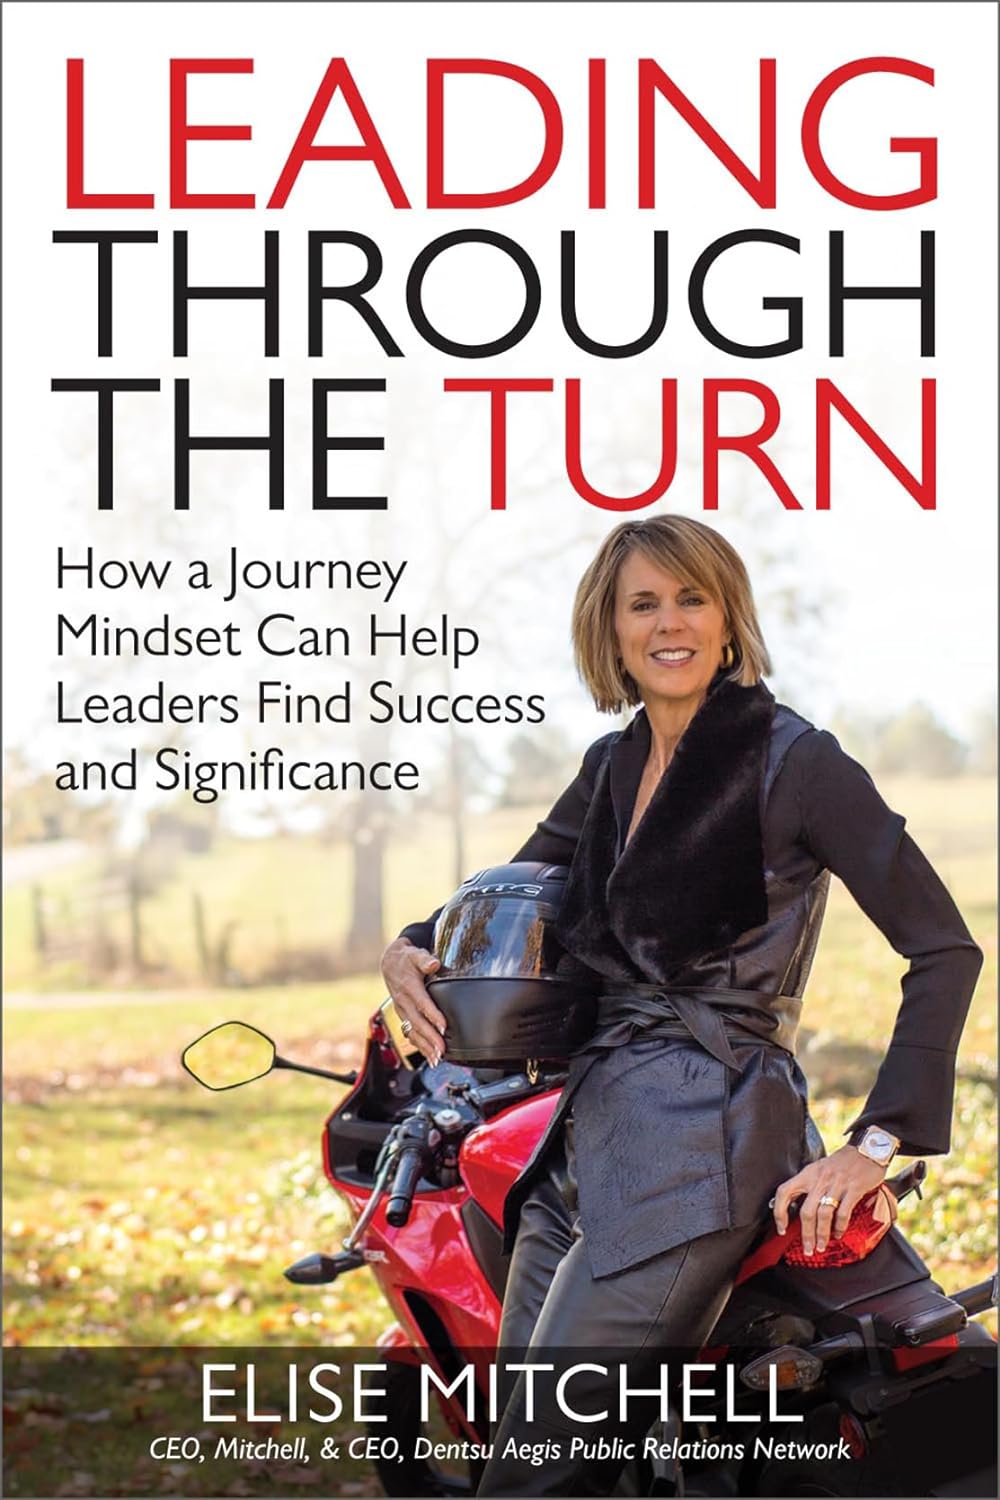 Elise Mitchell - Leading Through the Turn - How a Journey Mindset Can Help Leaders Find Success and Significance